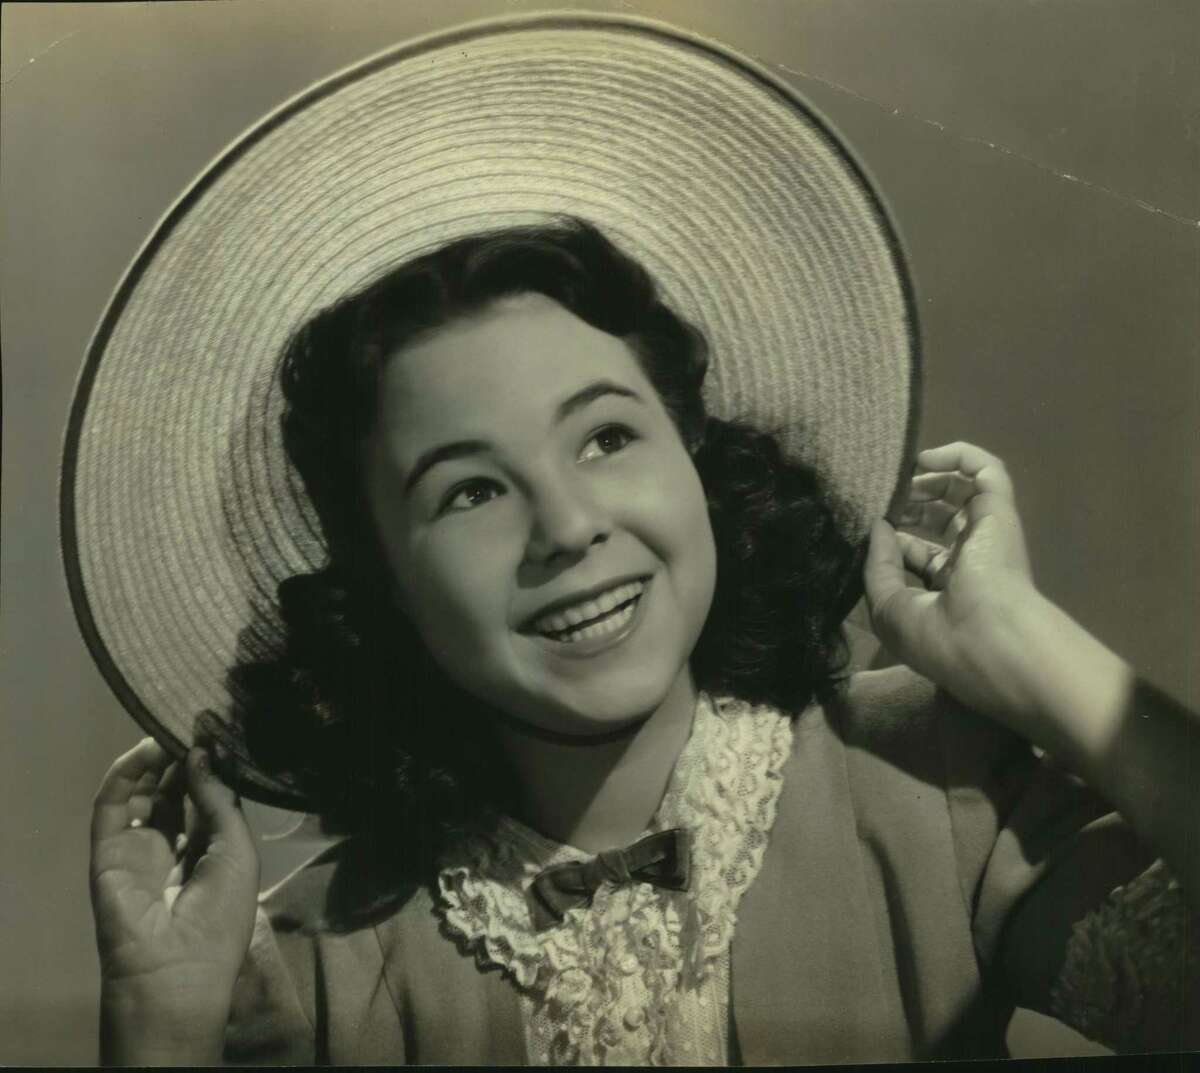 The late actress Jane Withers had a connection to San Antonio, filming “High School” at Thomas Jefferson High School.